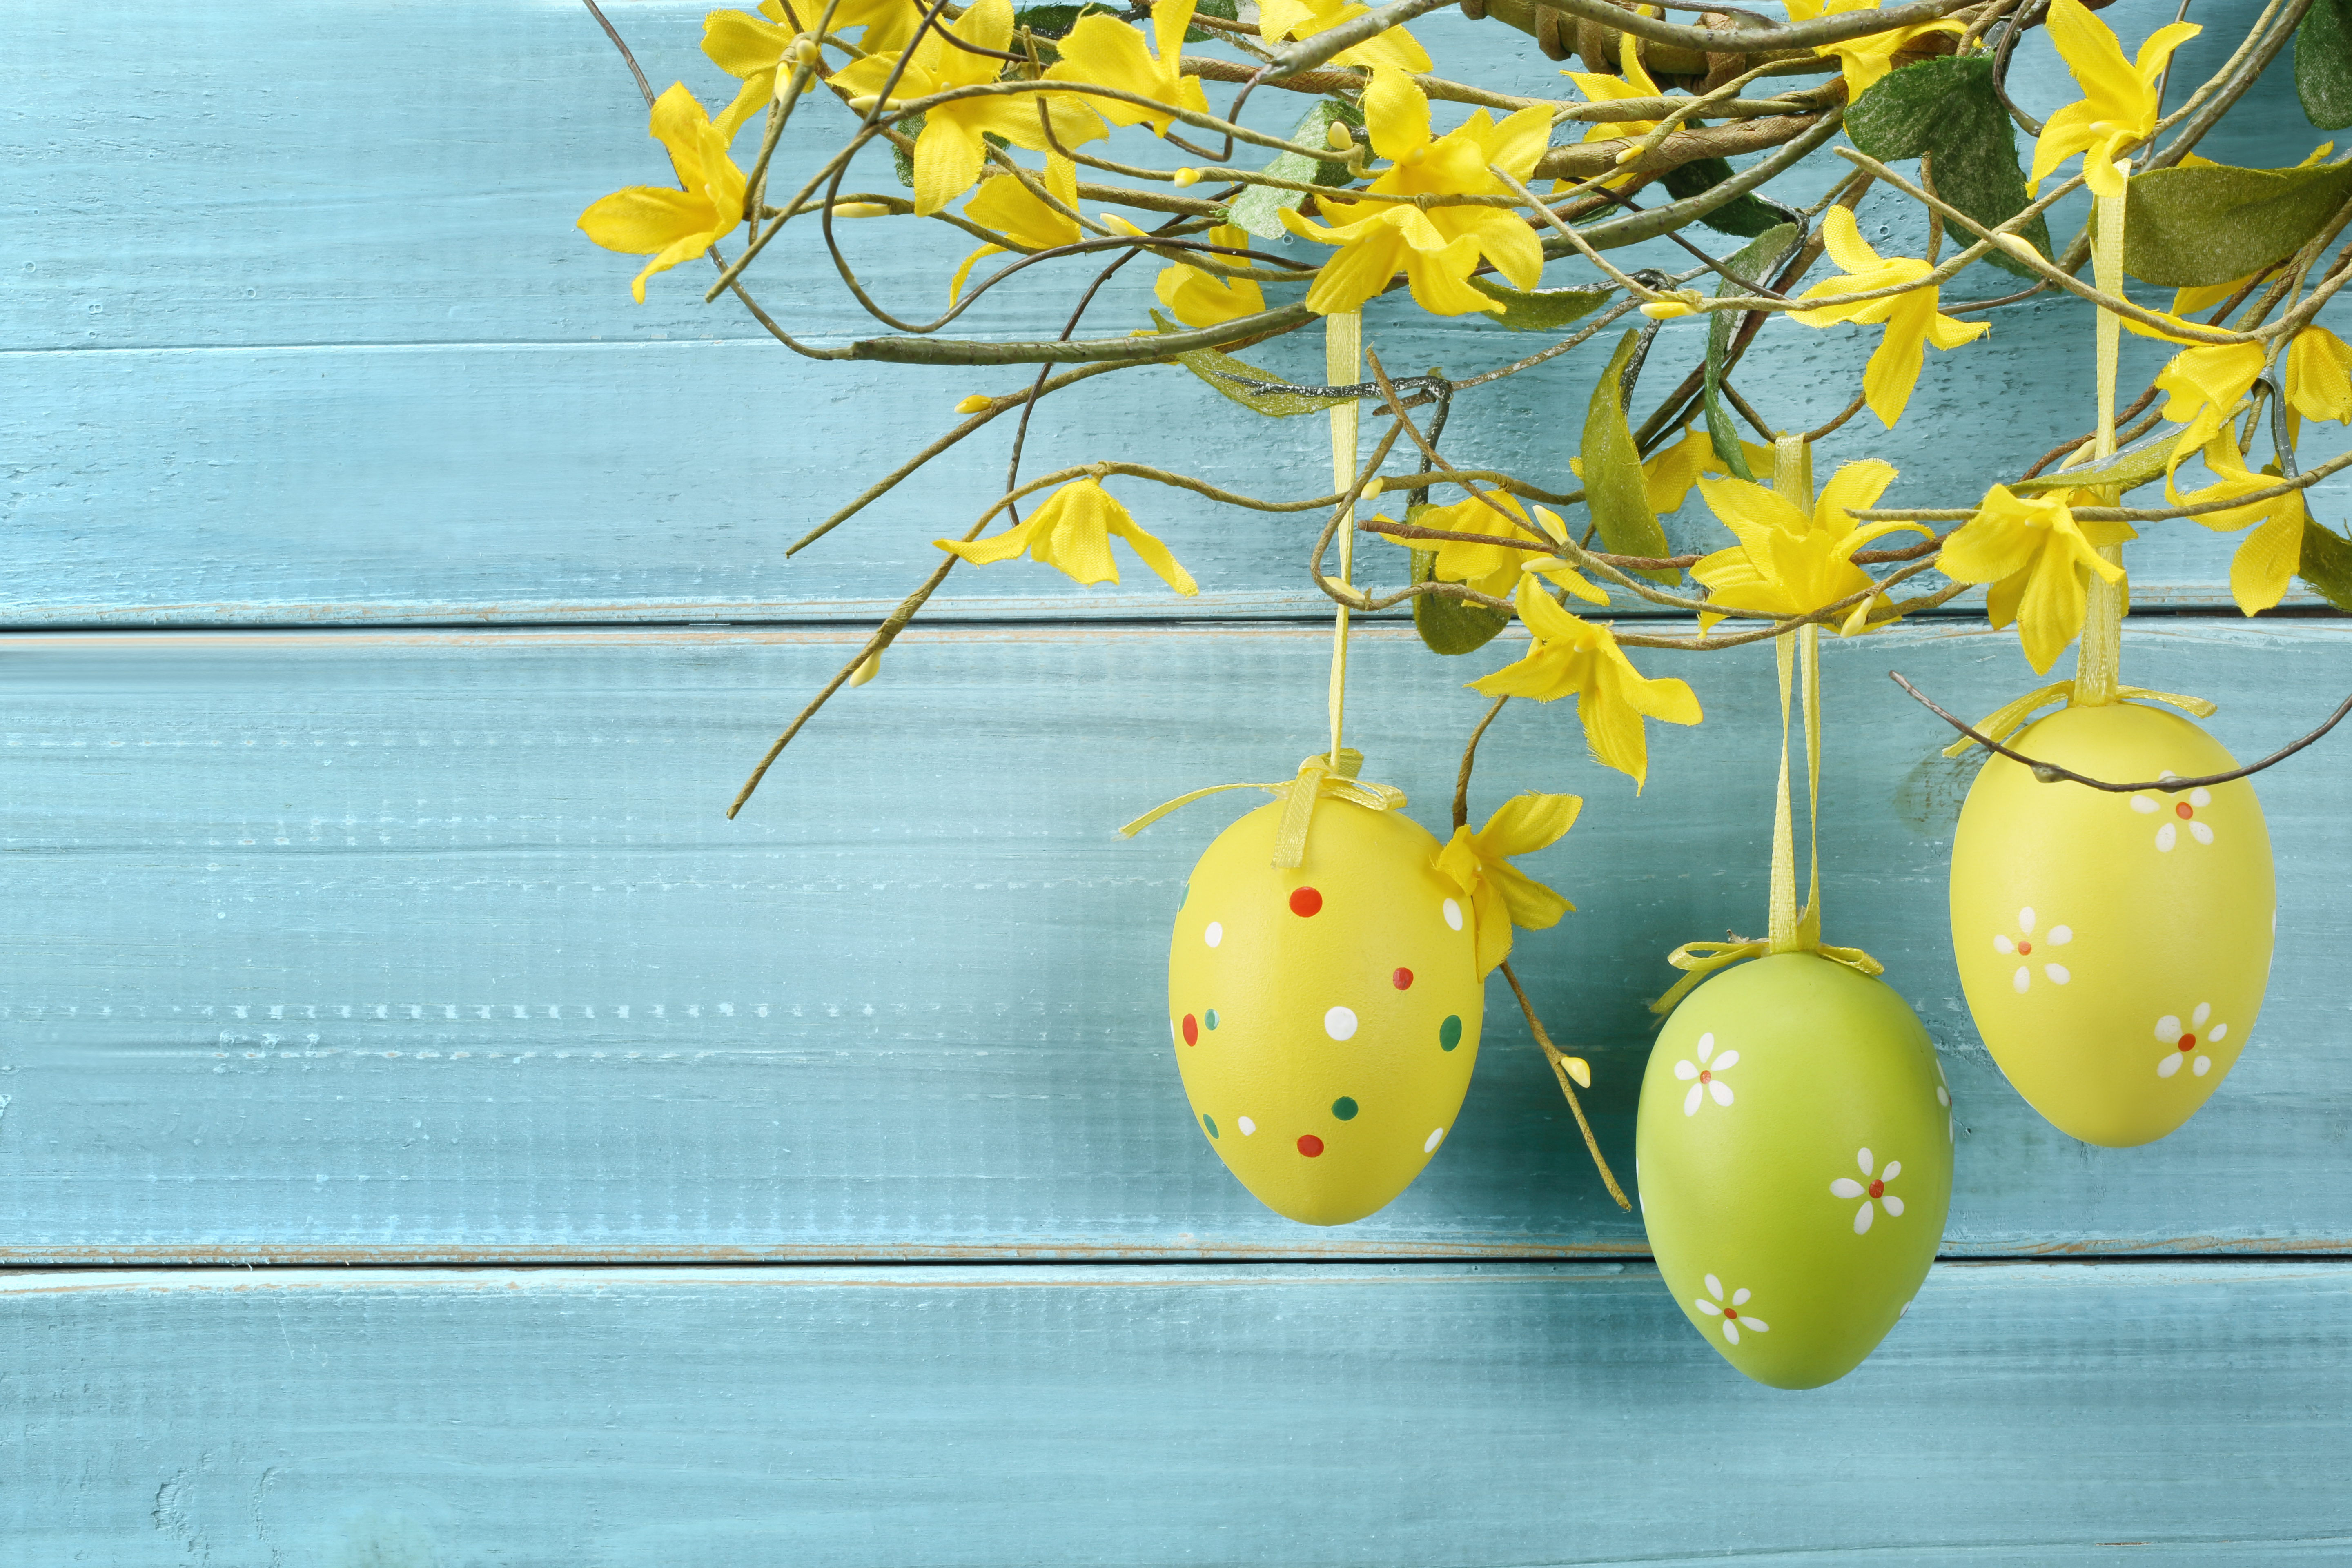 Easeter eggs hanging on forsythia branches